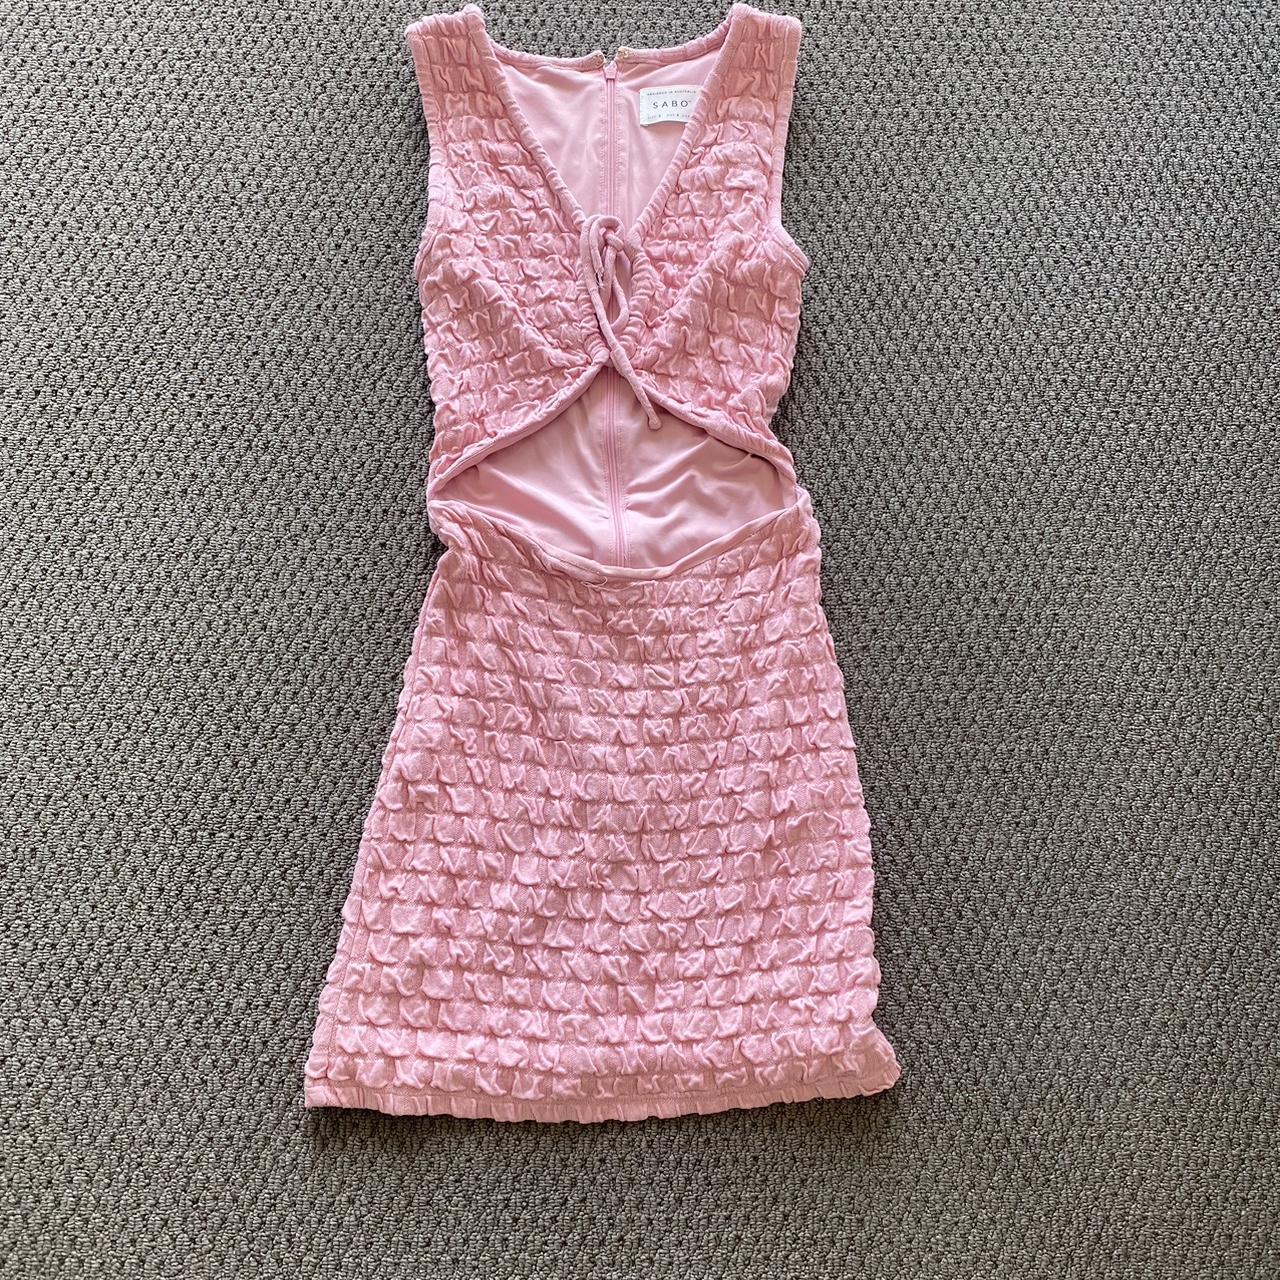 Sabo skirt pink mini worn once with no wear or tear - Depop